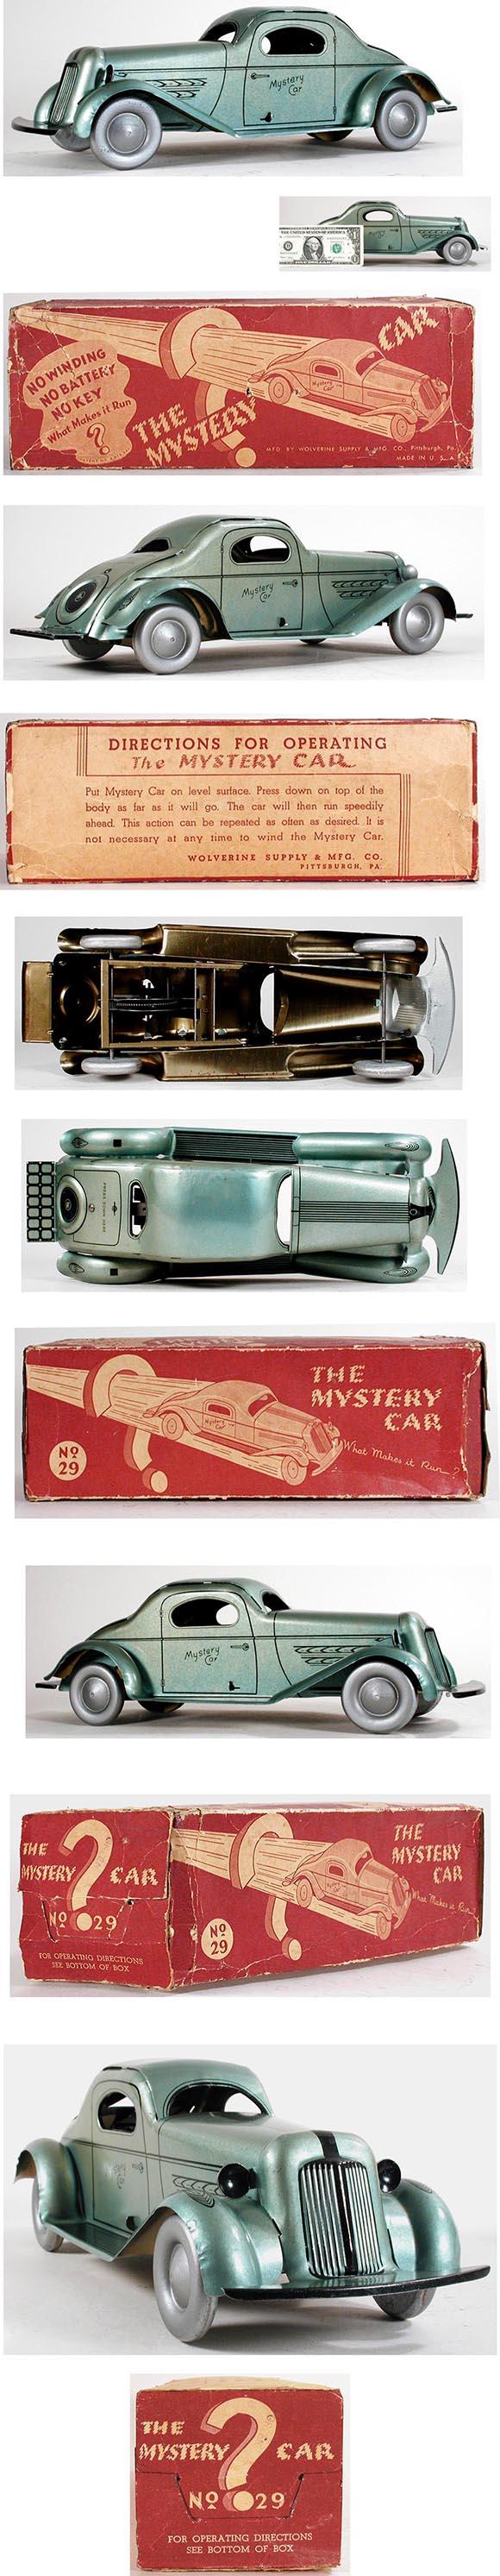 1936 Wolverine, The Mystery Car in Original Box